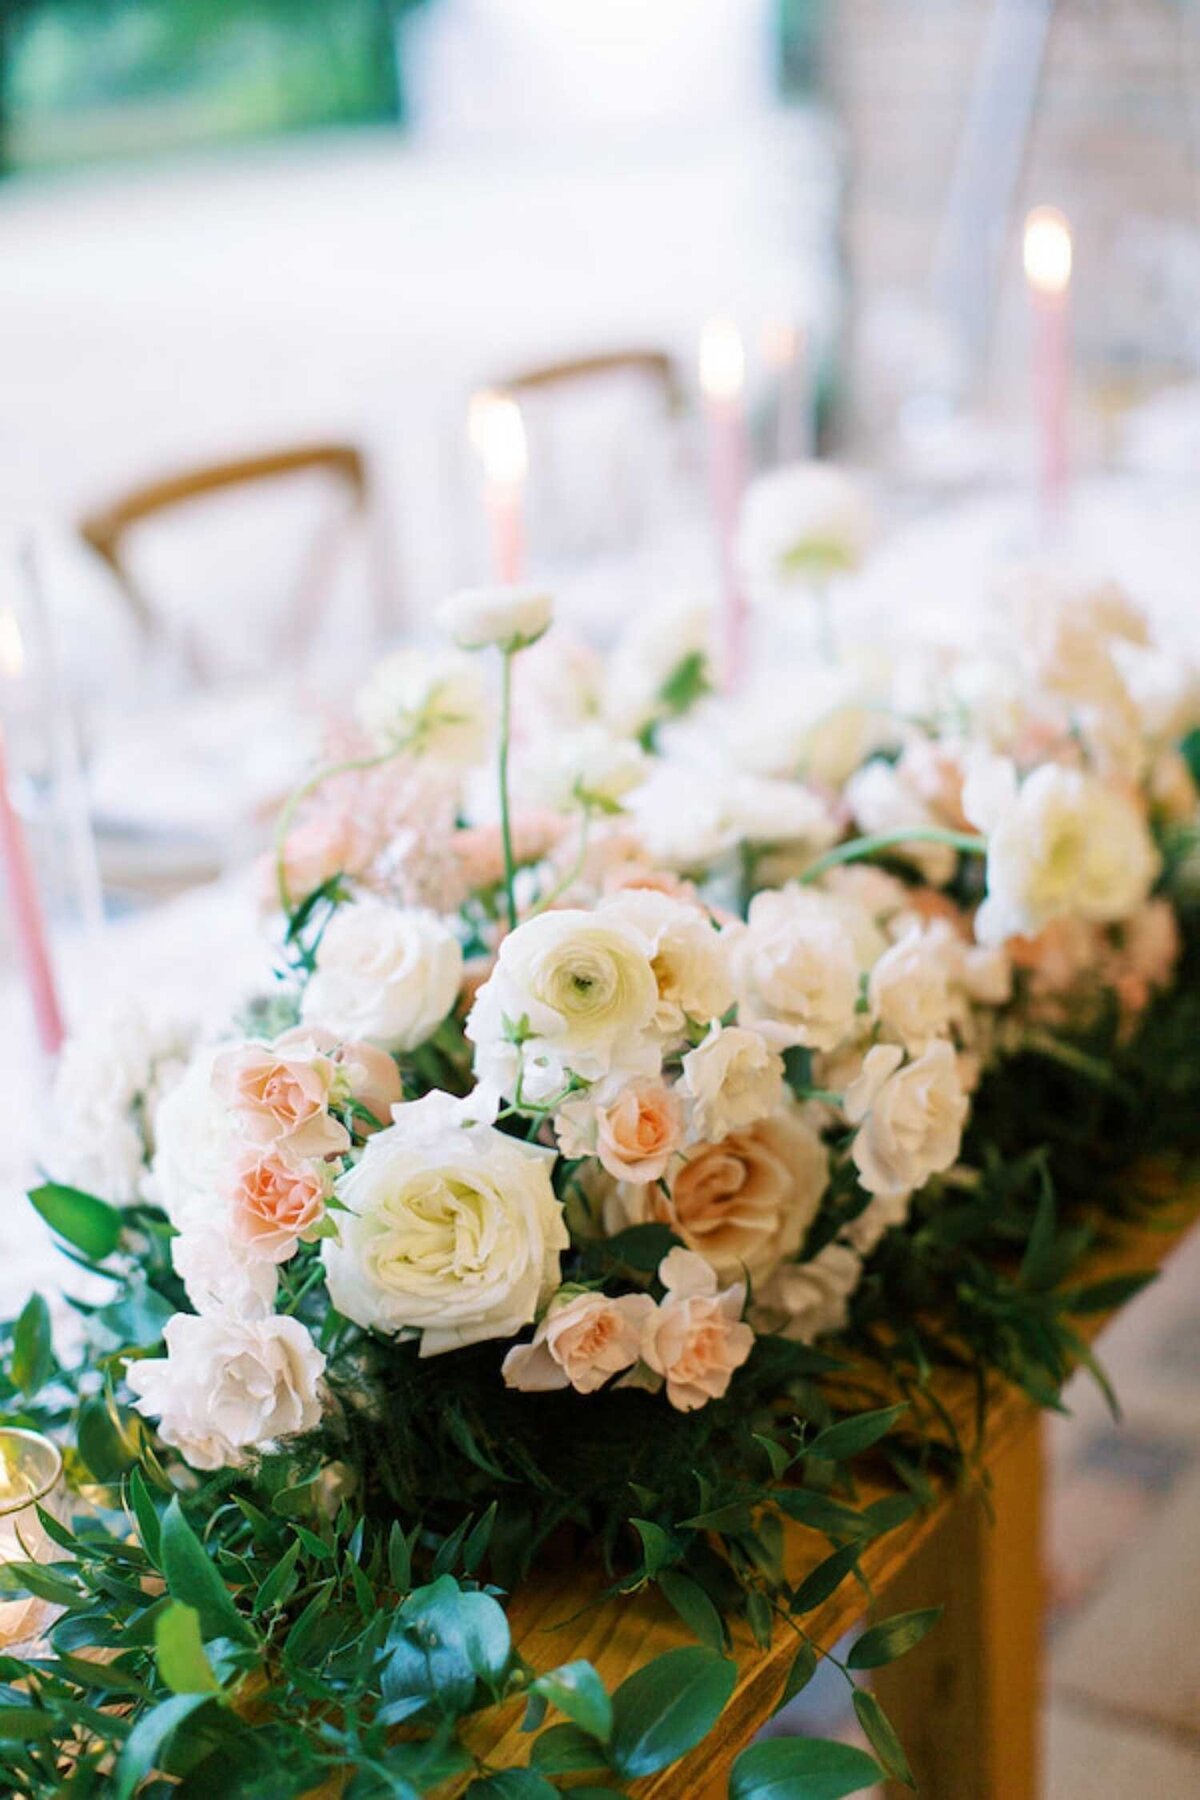 Dramatic and lush floral table runner down the head table at a luxury Chicago outdoor garden wedding.